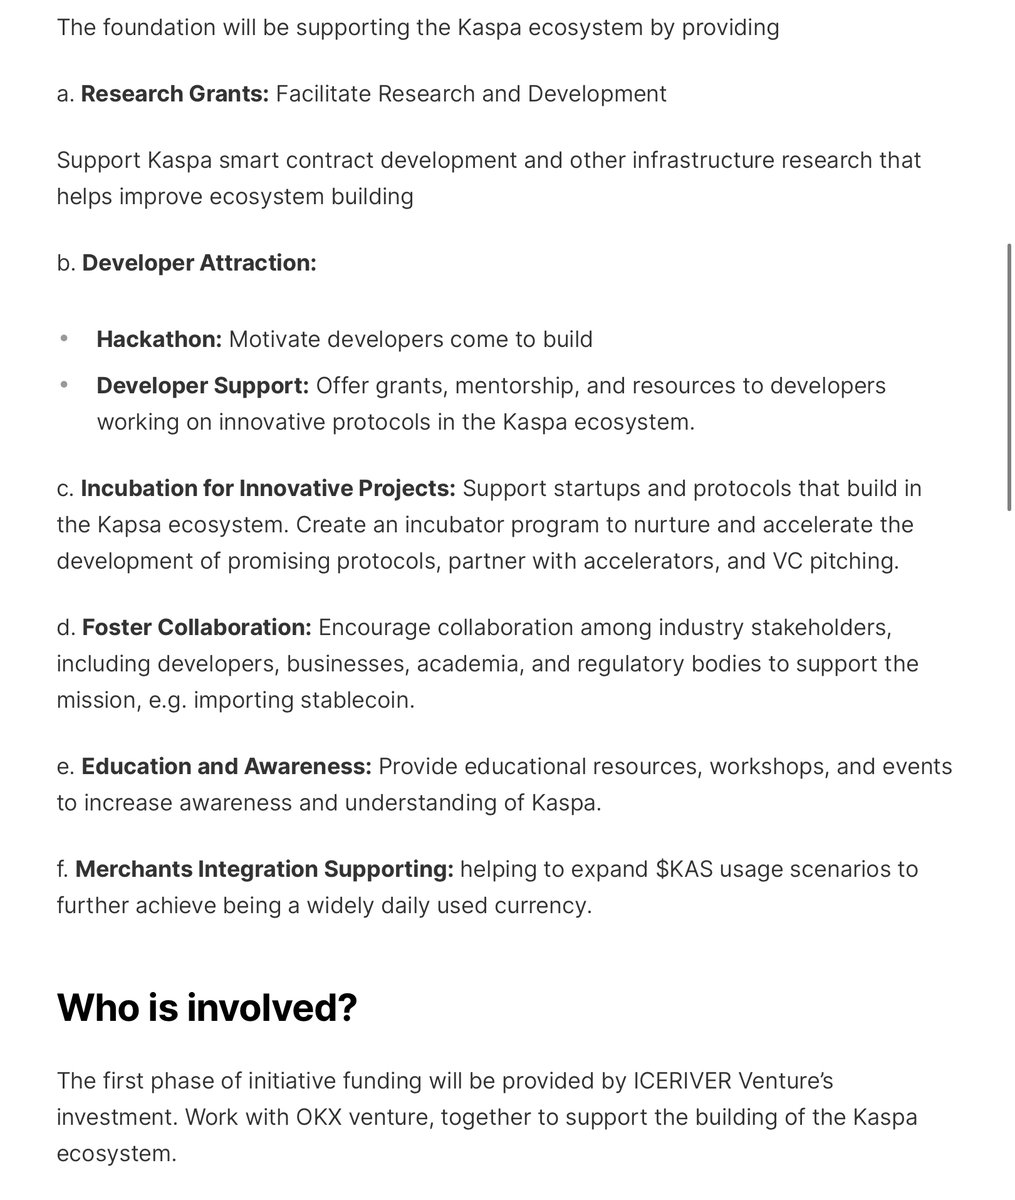 Formation of #kaspa ecosystem foundation

smart contracts, inscriptions, merchant adoption & much more comes to $kas

backed by IceRiver, Coinpal, OKX ventures & more  

Things are heating up🔥
heres a Preview👇

$avax $cfx $near $inj $dot $ada $trx $ftm $ton $apt $eth $iota $tia